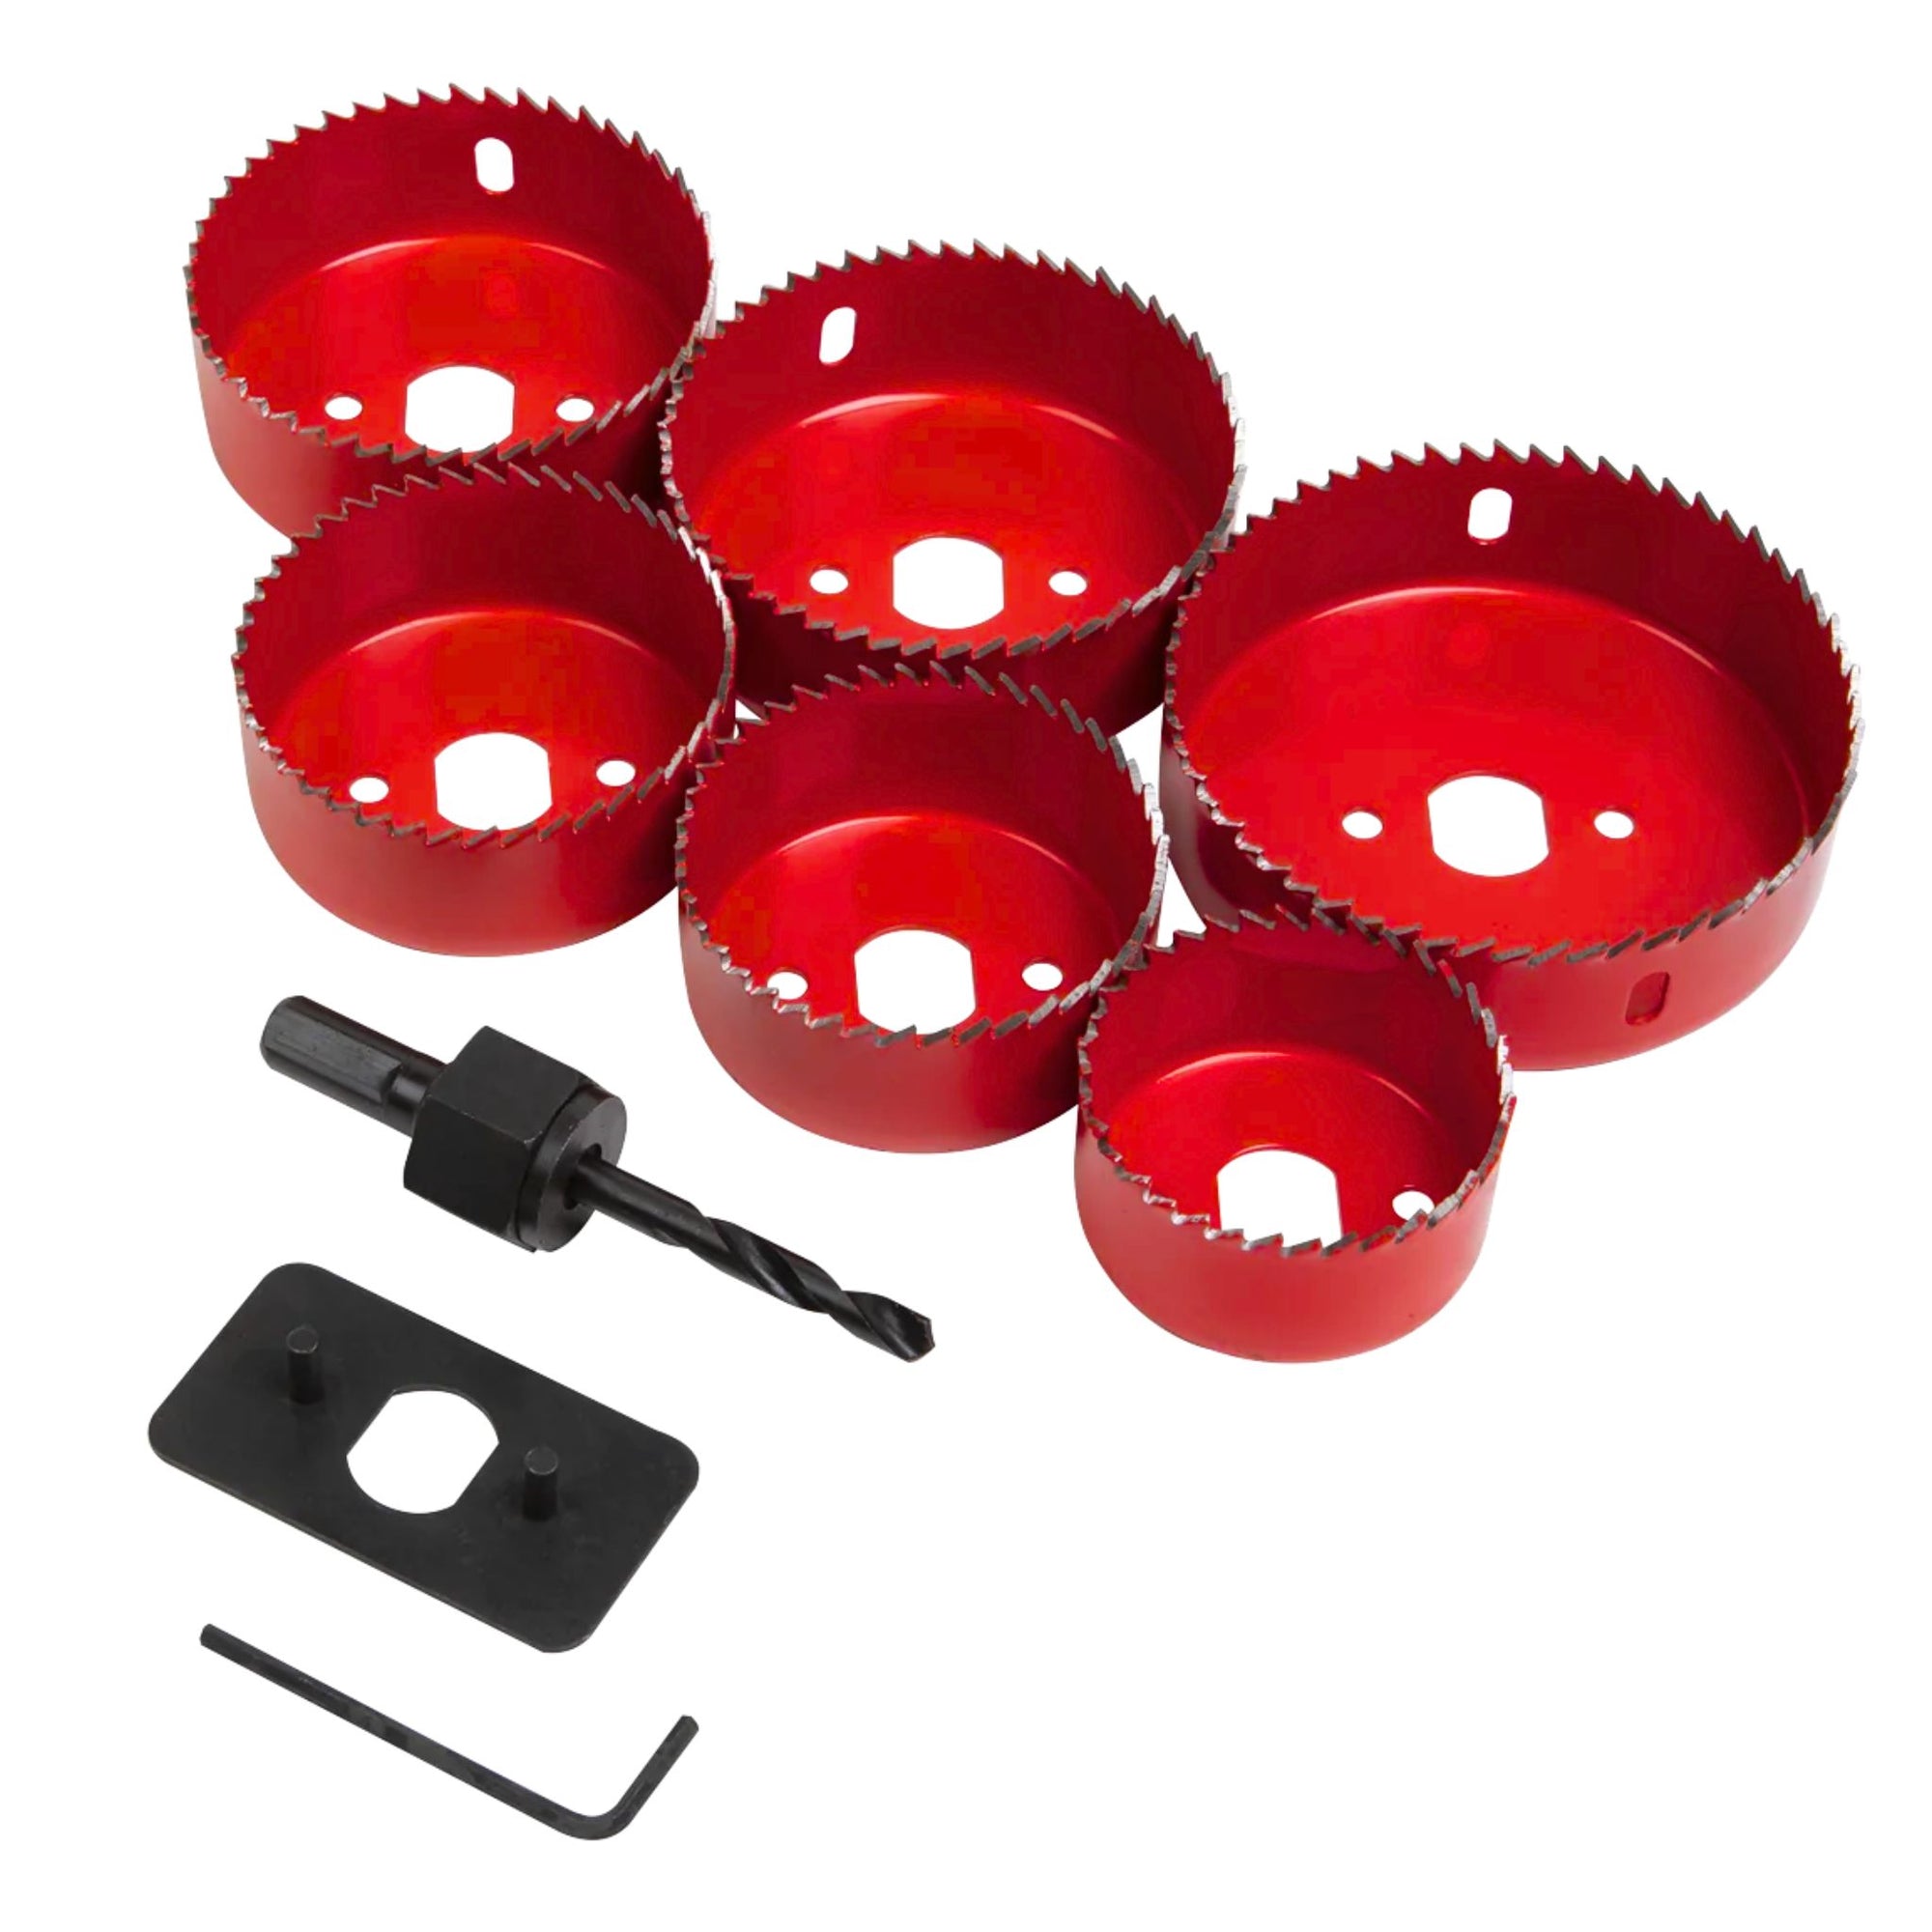 Downlight Hole Saw Kit 9 Piece set - South East Clearance Centre